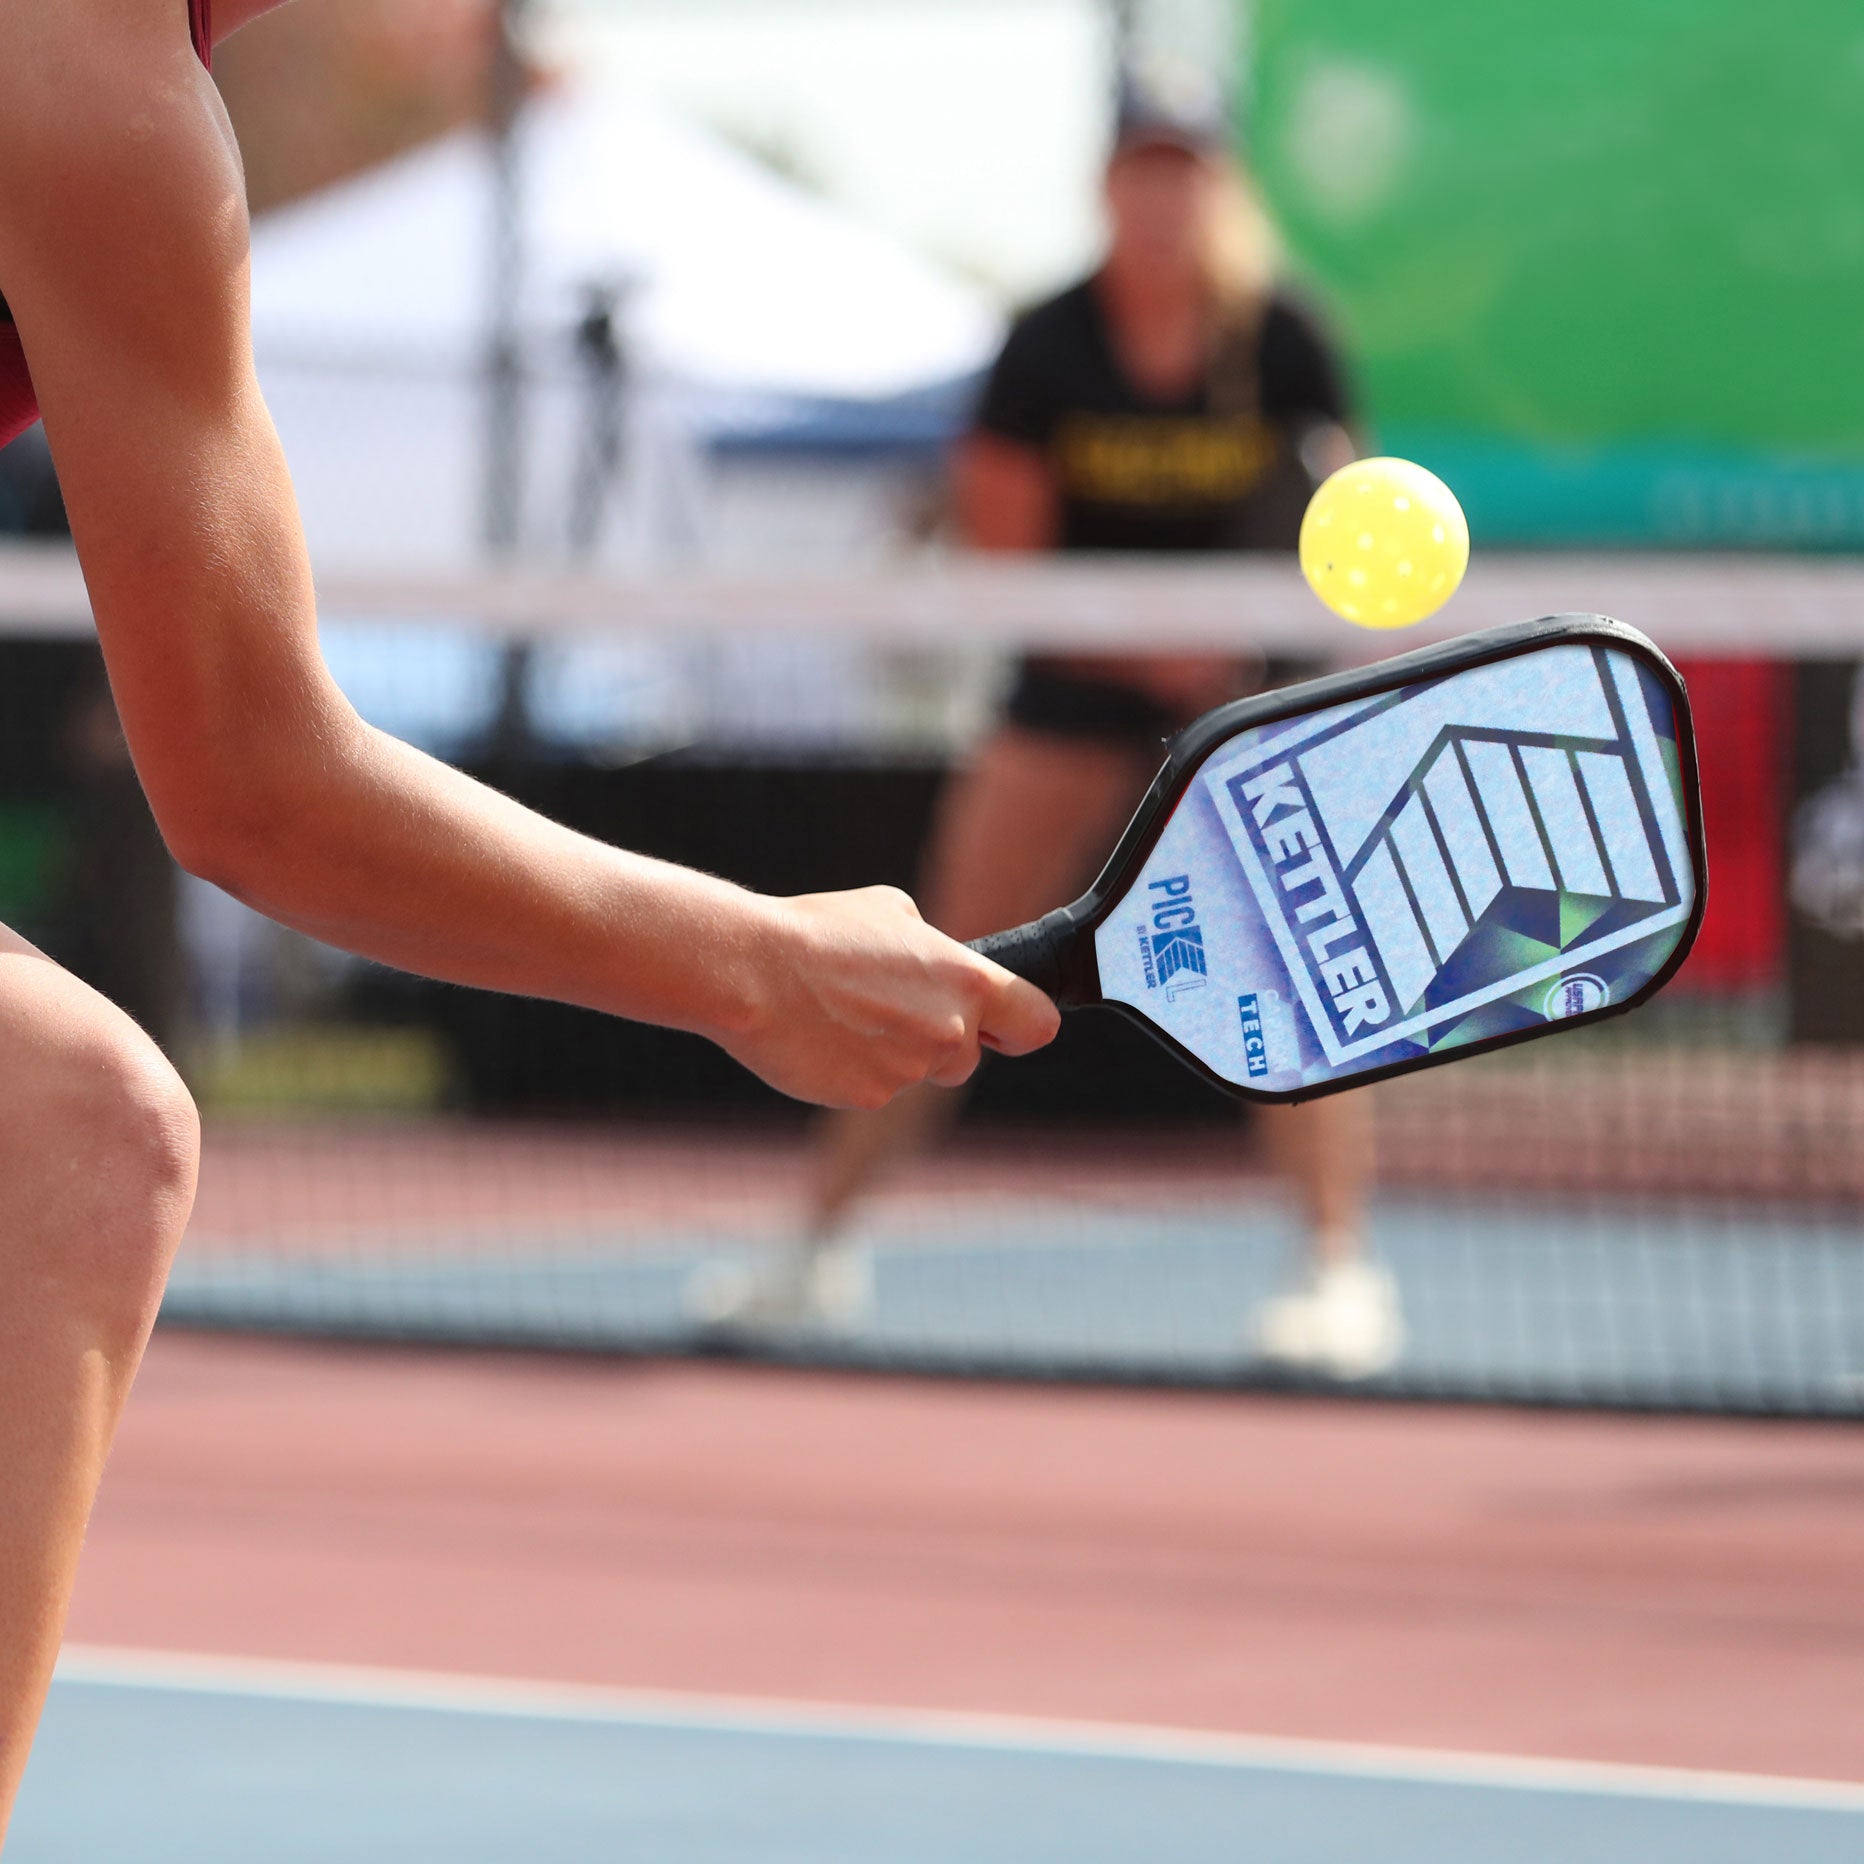 Image of a woman playing pickleball